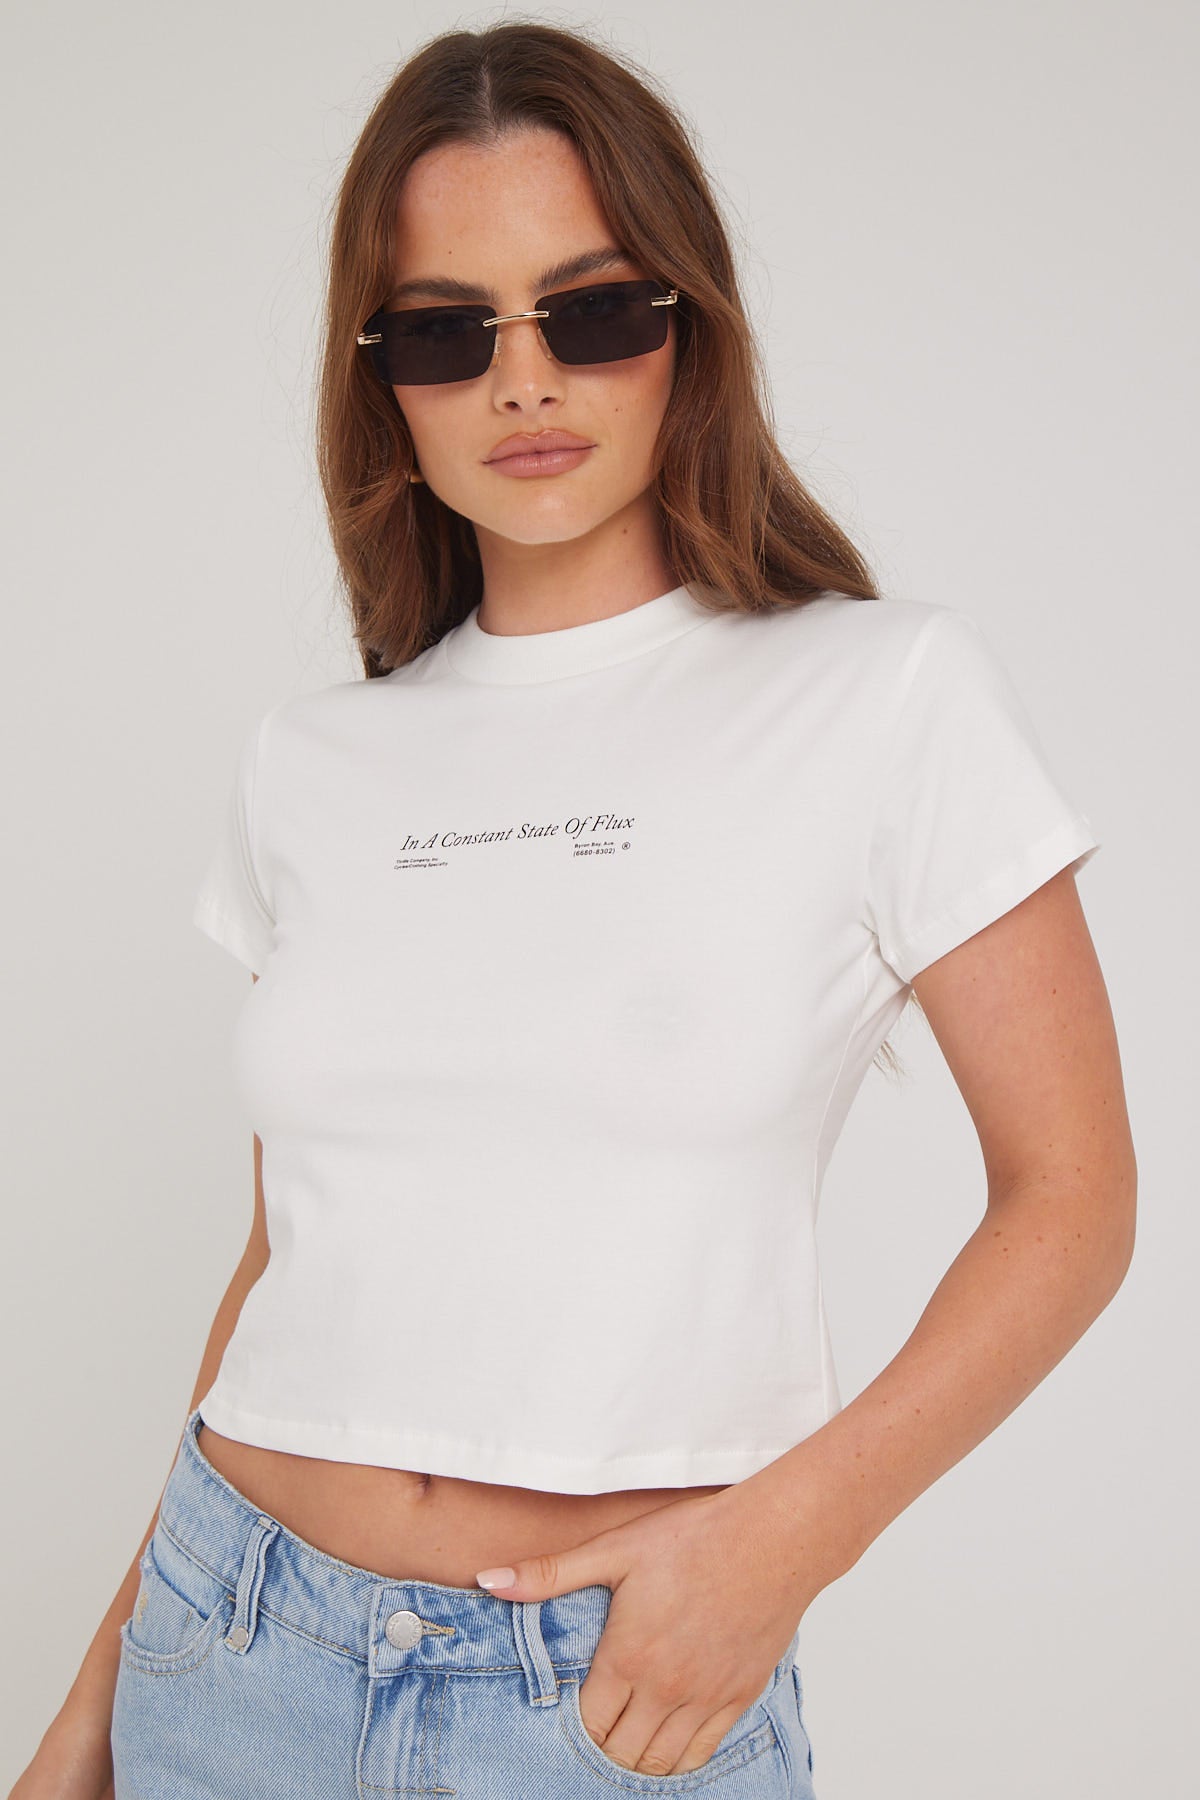 Thrills Constant State of Flux Mini Tee White